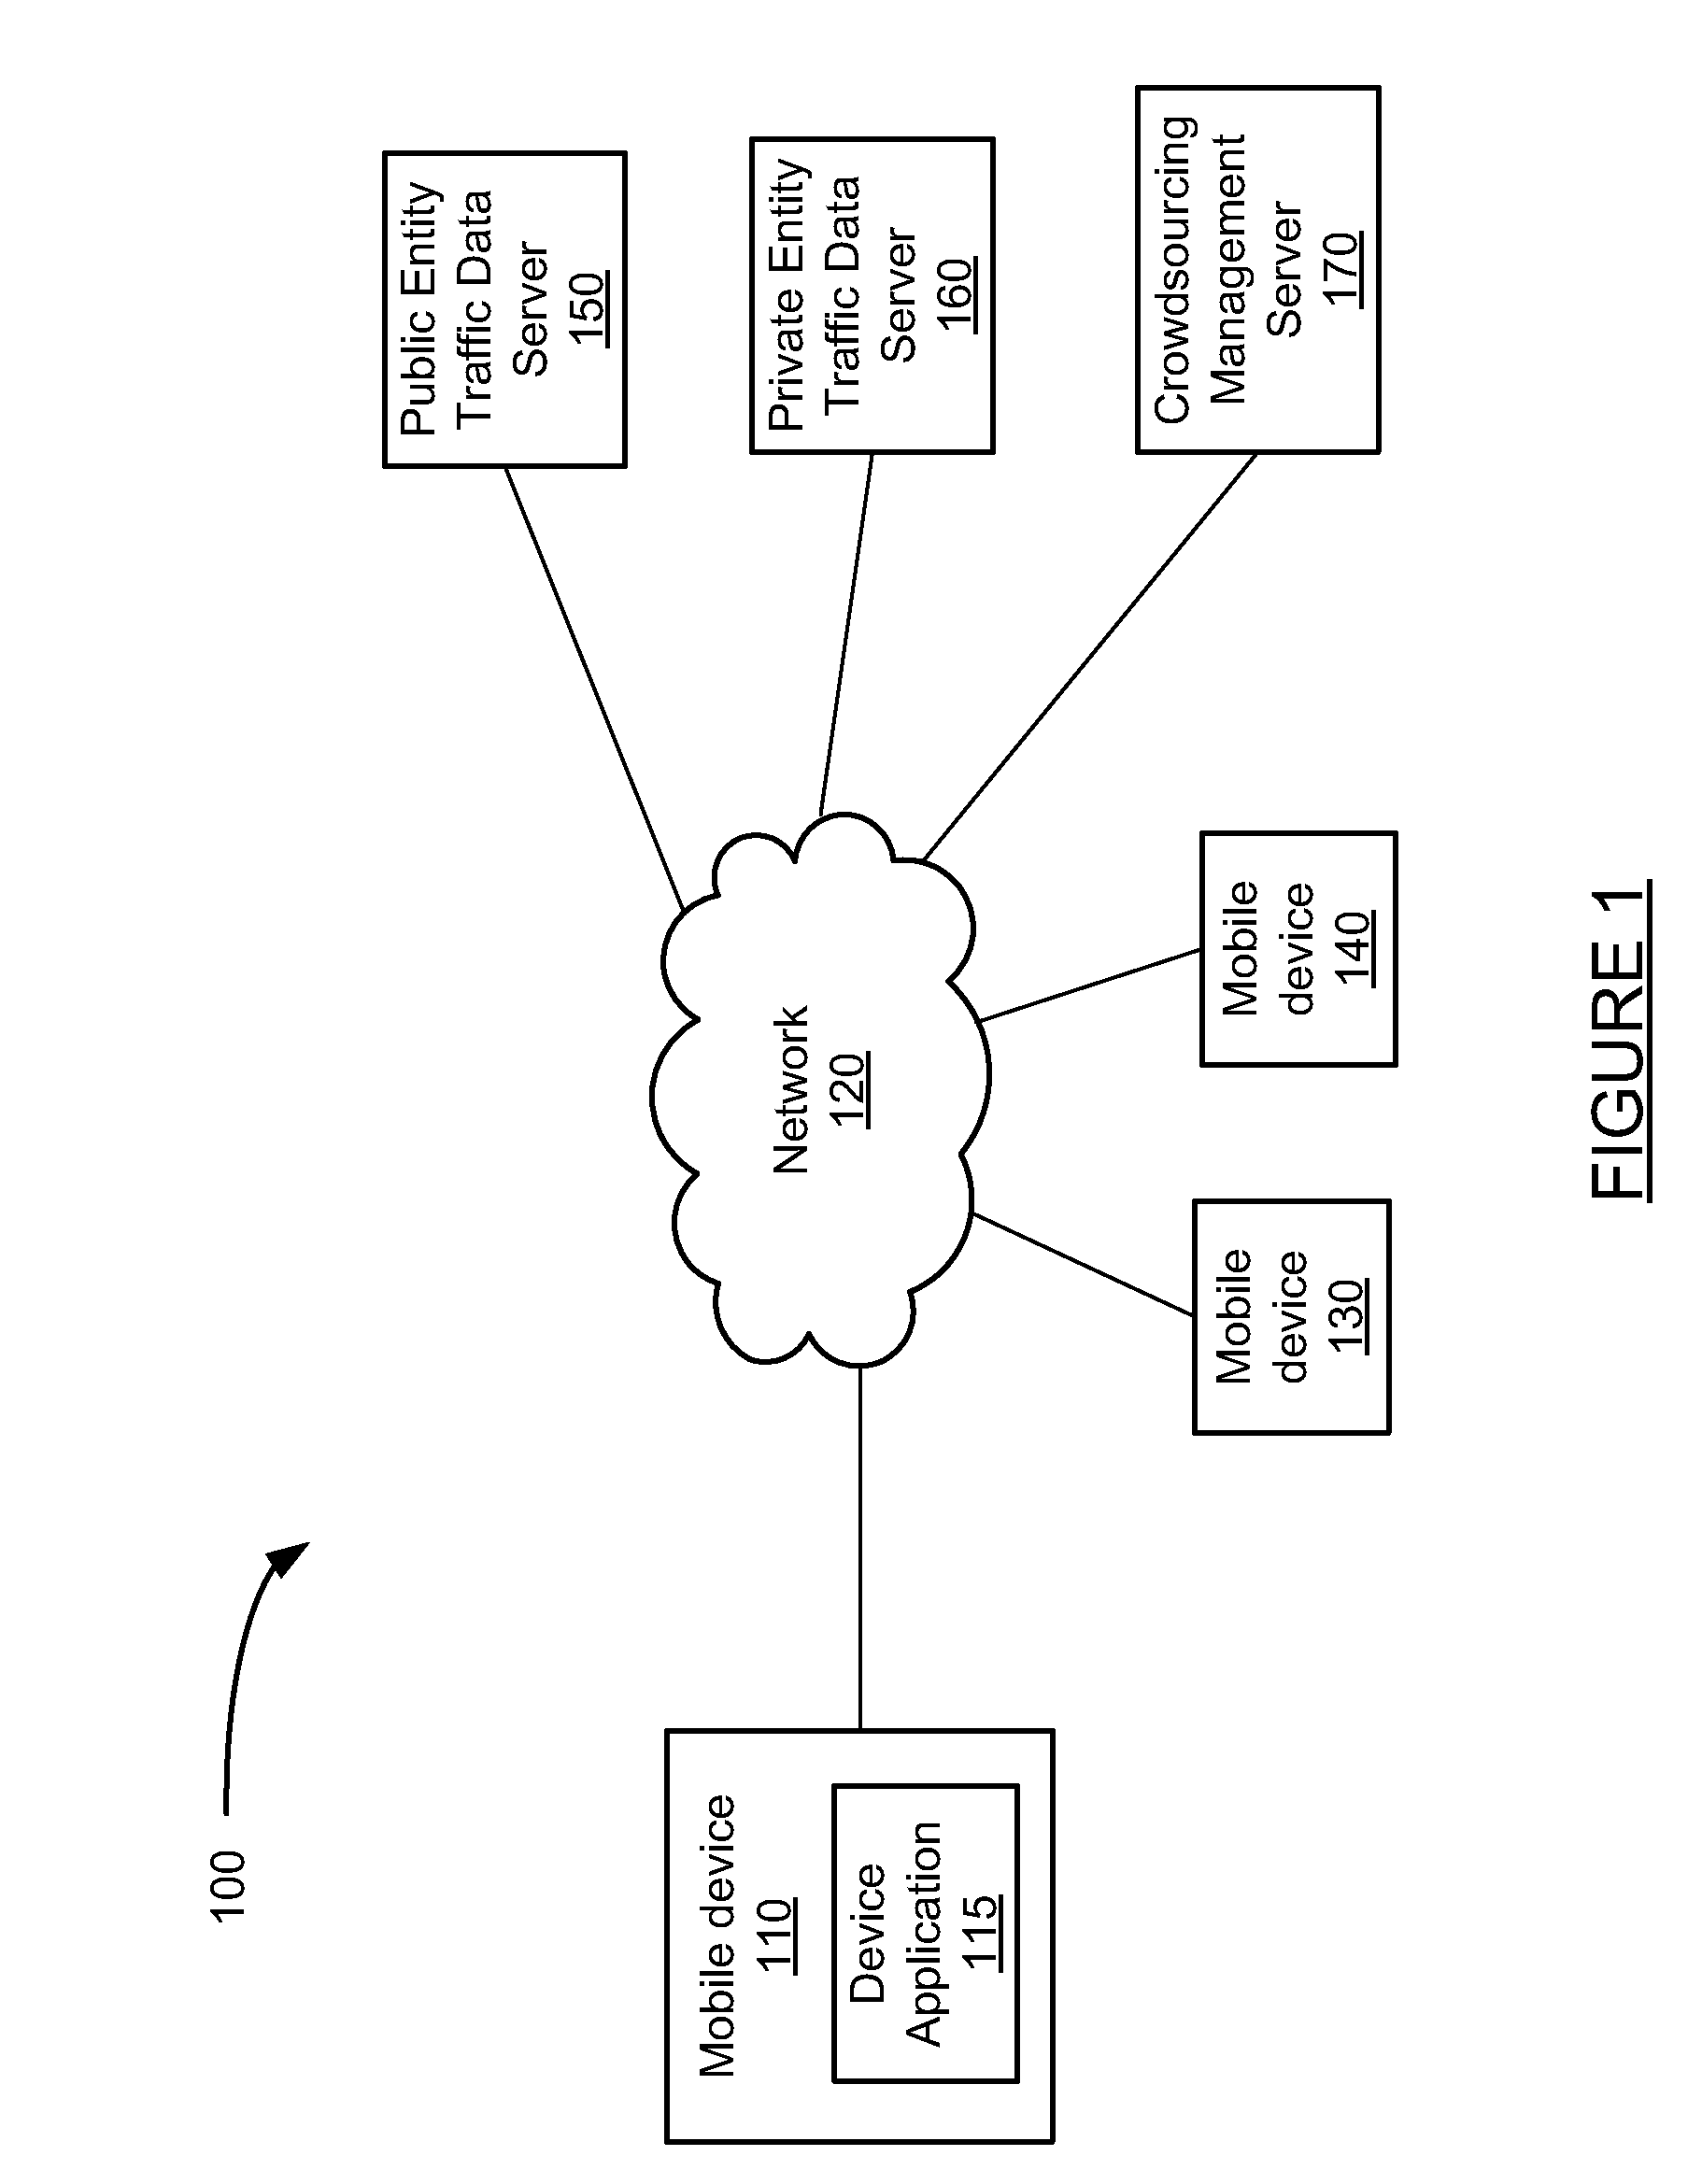 System for providing traffic data and driving efficiency data